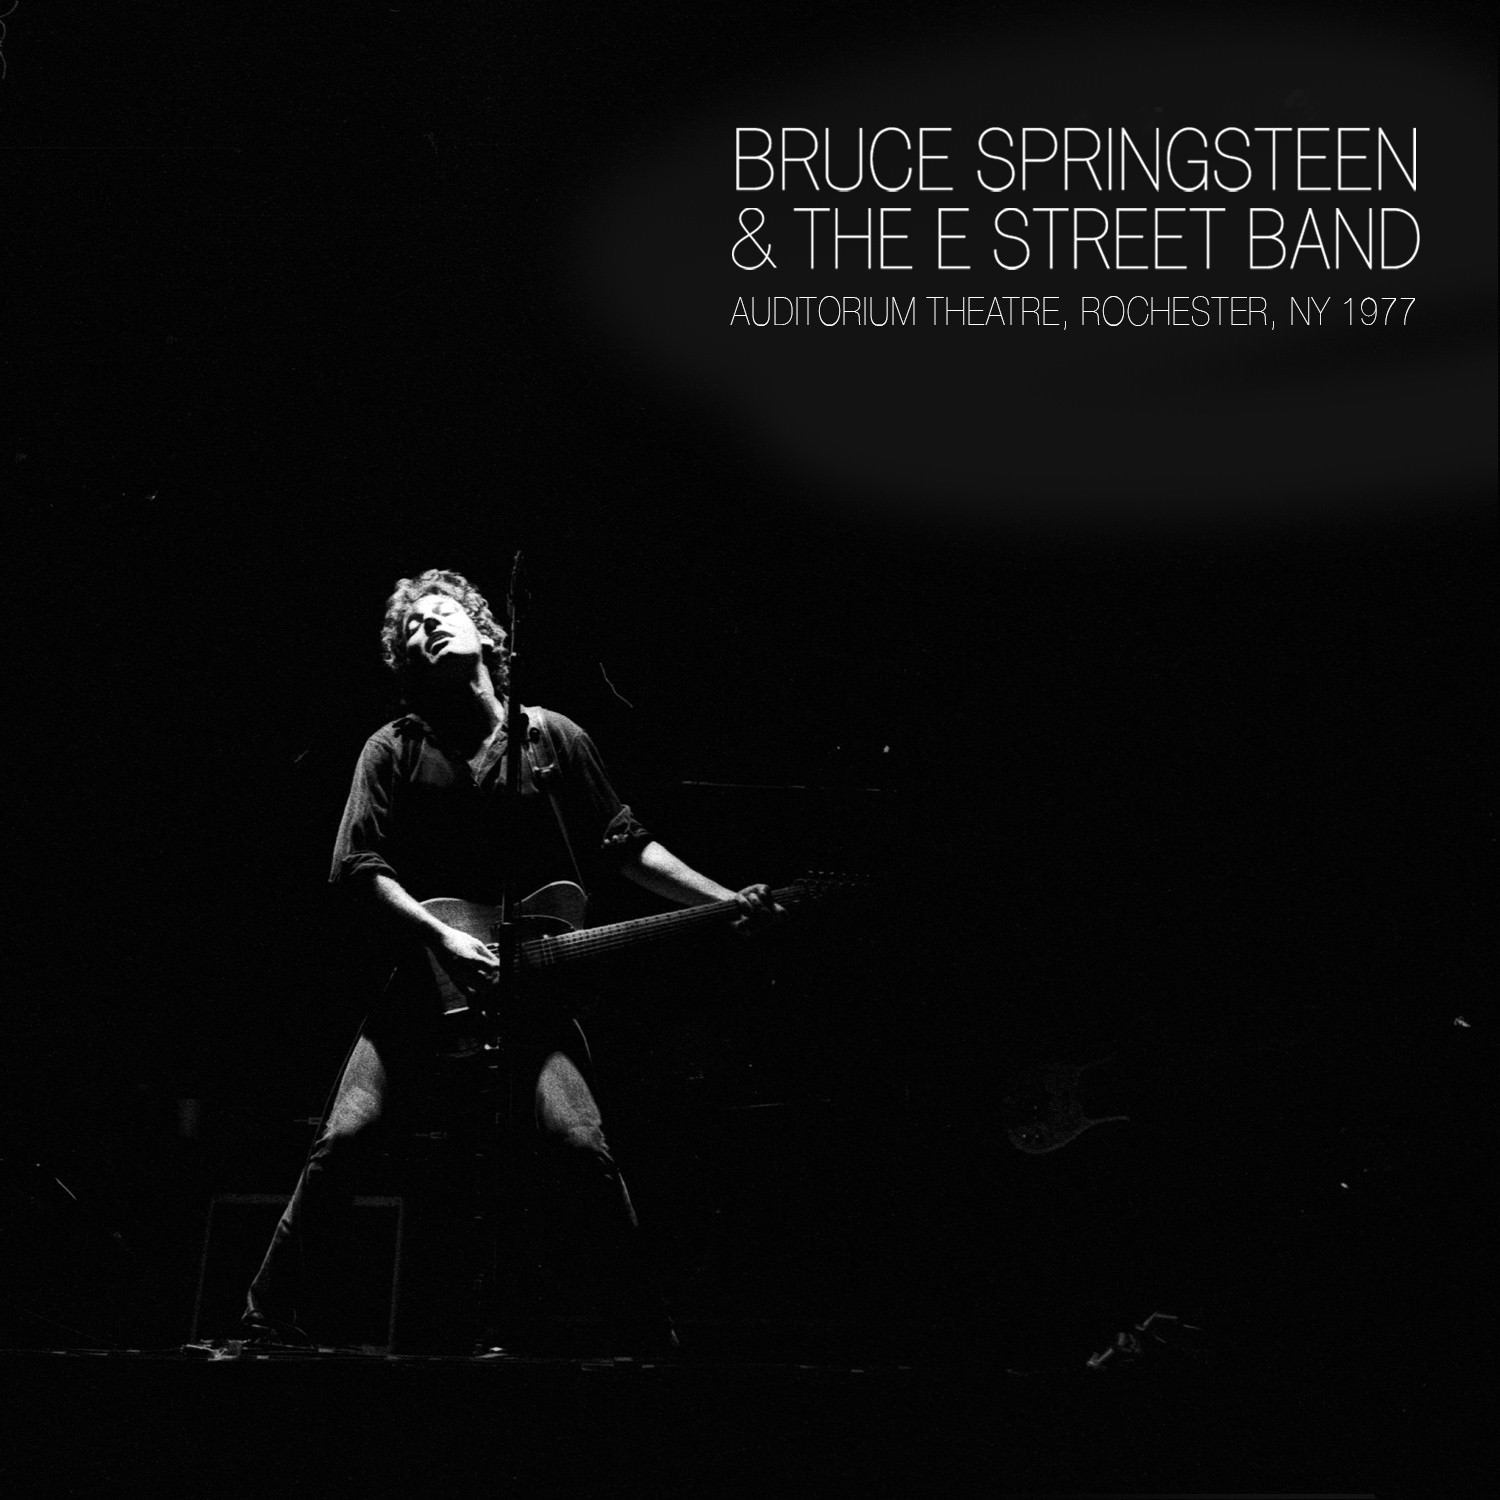 Bruce Springsteen & The E Street Band – 1977-02-08 – Auditorium Theatre, Rochester, NY (2017) [FLAC 24bit/192kHz]